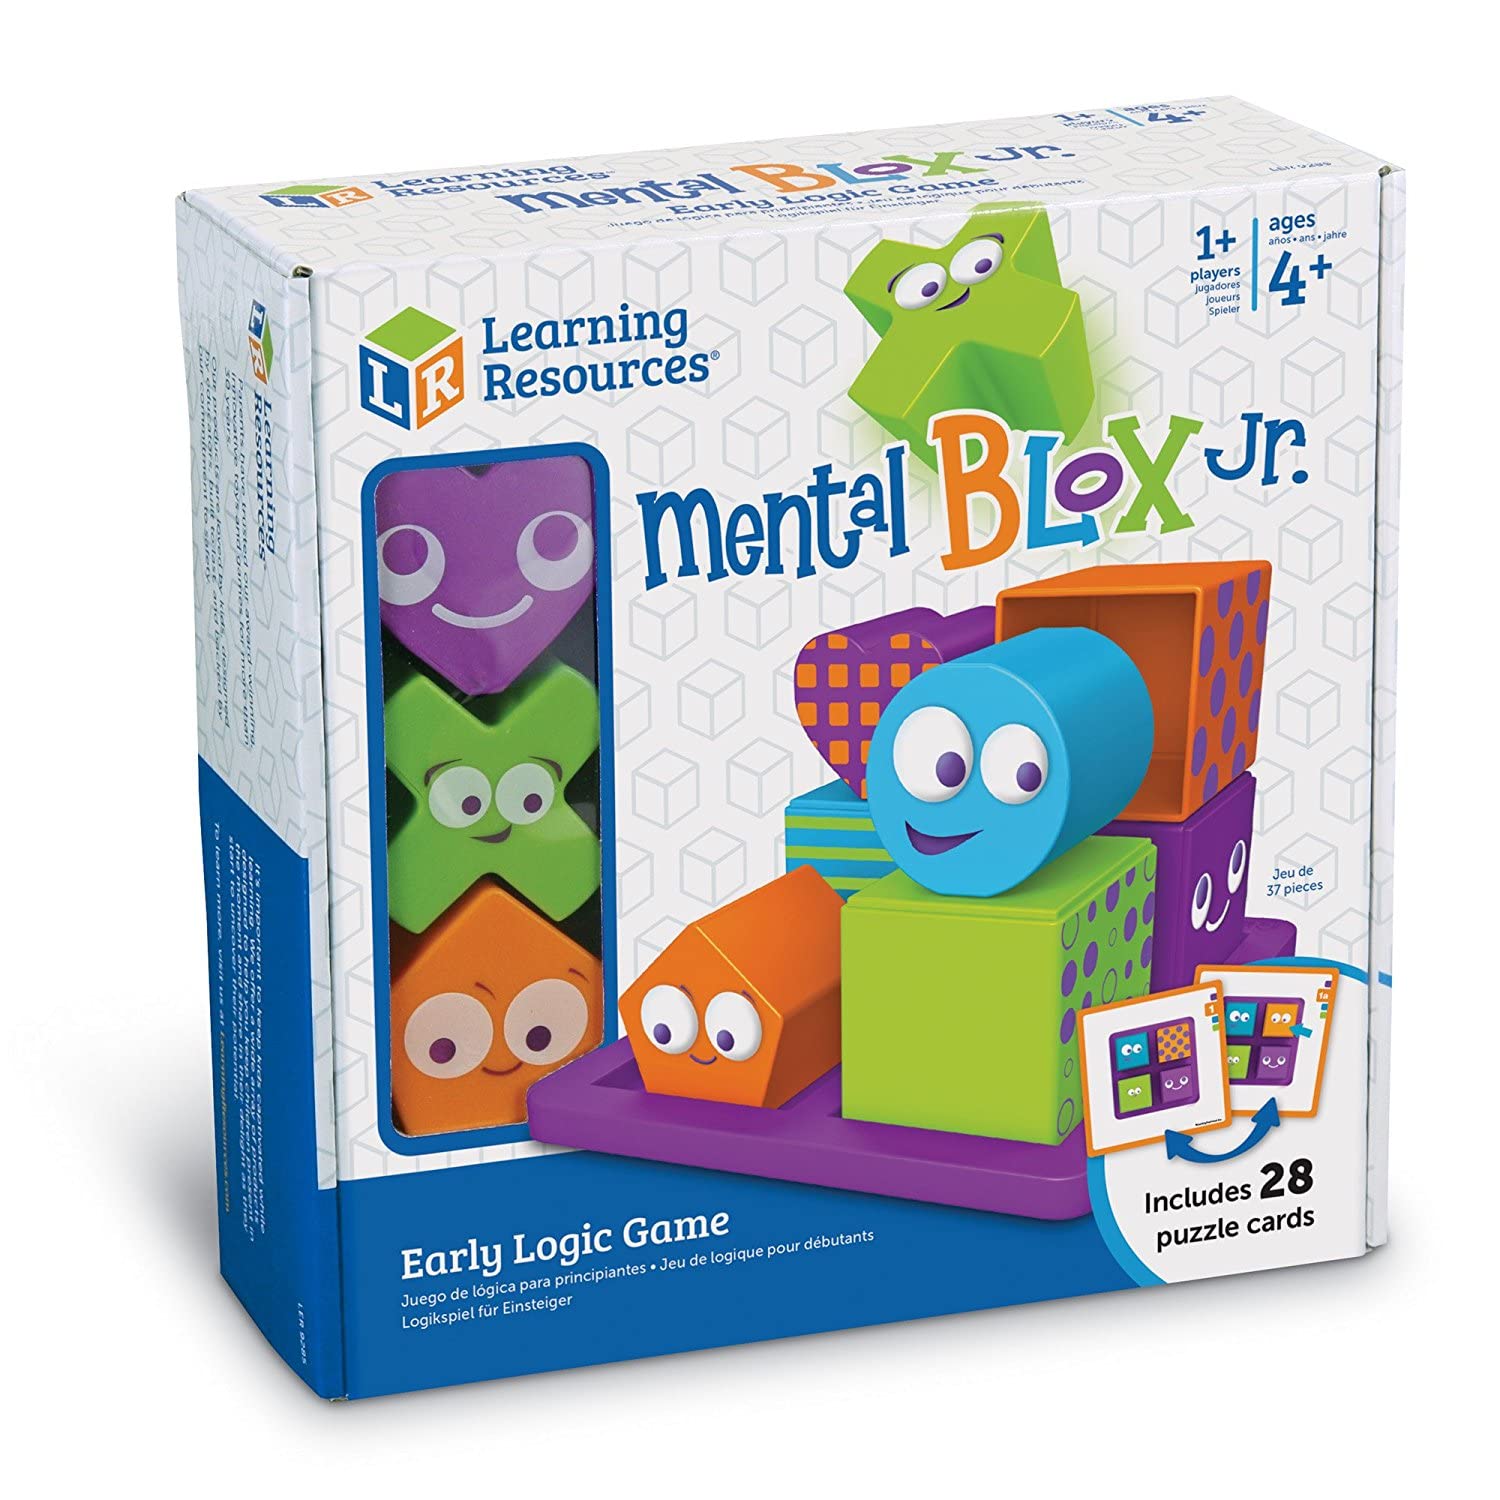 Learning Resources Mental Blox Jr. Early Logic Game - 8 Pieces, Ages 4+ Educational Games for Kids, Brain Teaser Games and Puzzles, STEM Games, 3-D Puzzles, Critical Thinking for Kids